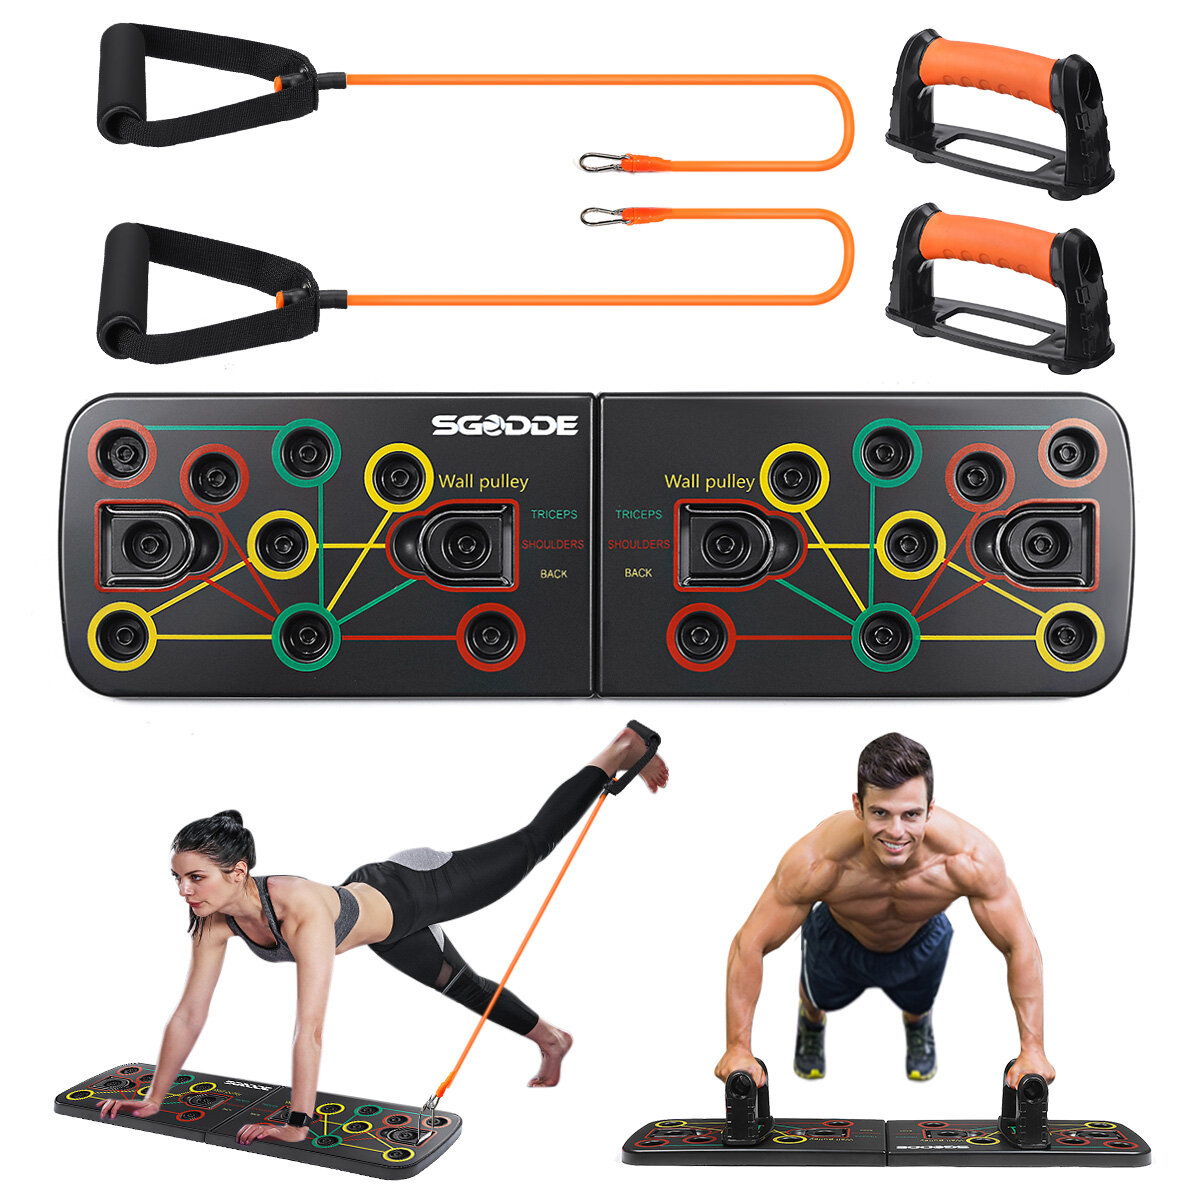 Image of SGODDE 13 In1 Folding Push-up Rack Board With Handle&Resistance Band Fitness Workout Training Gym Exercise Pushup Stand